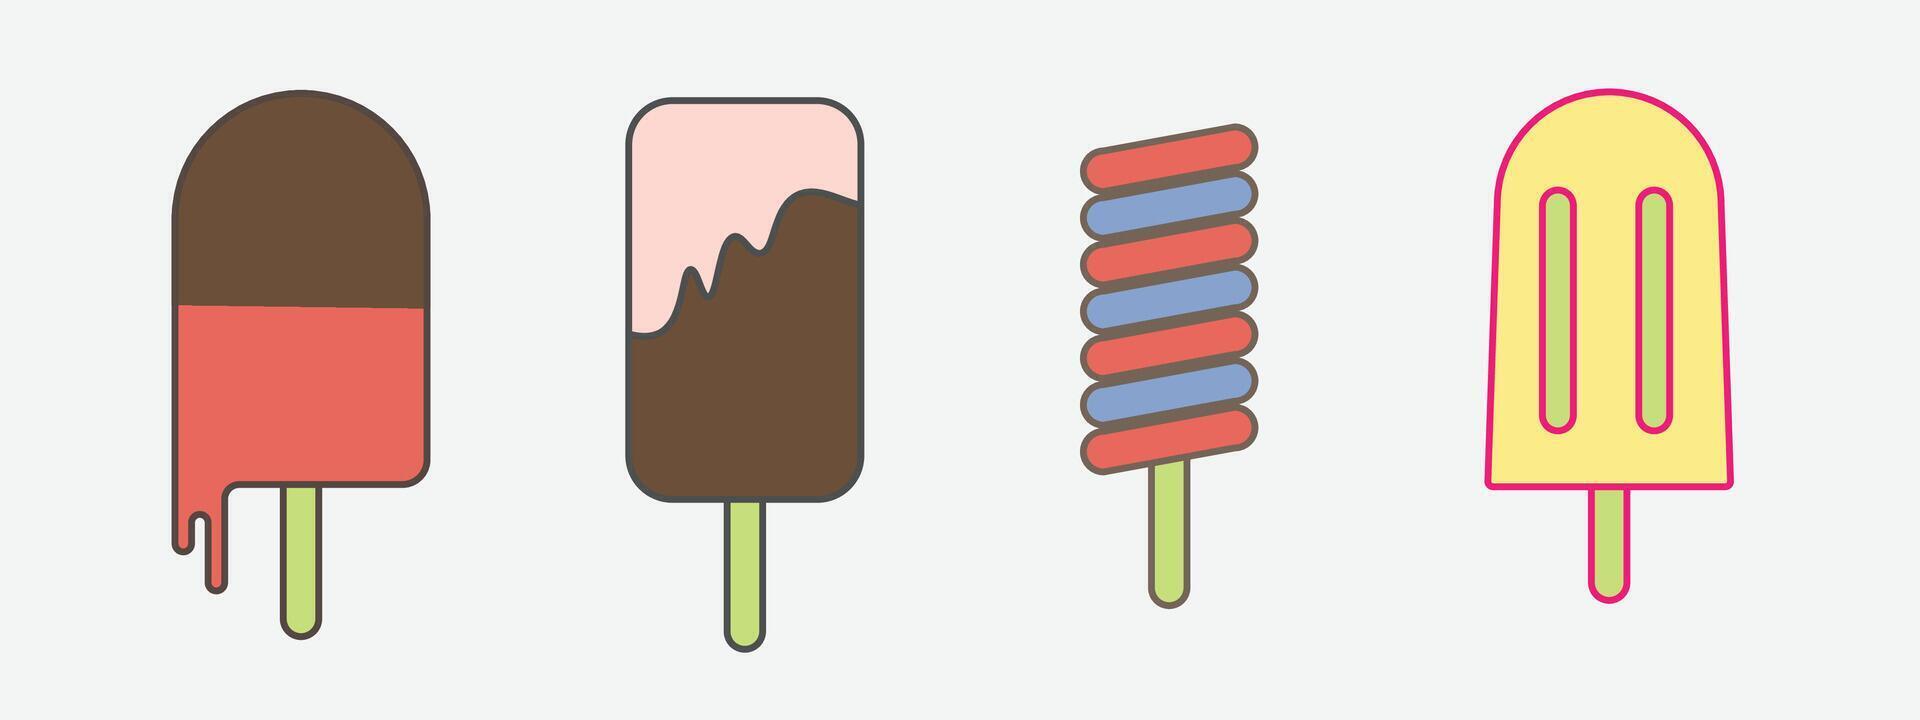 Collection of ice cream icons vector